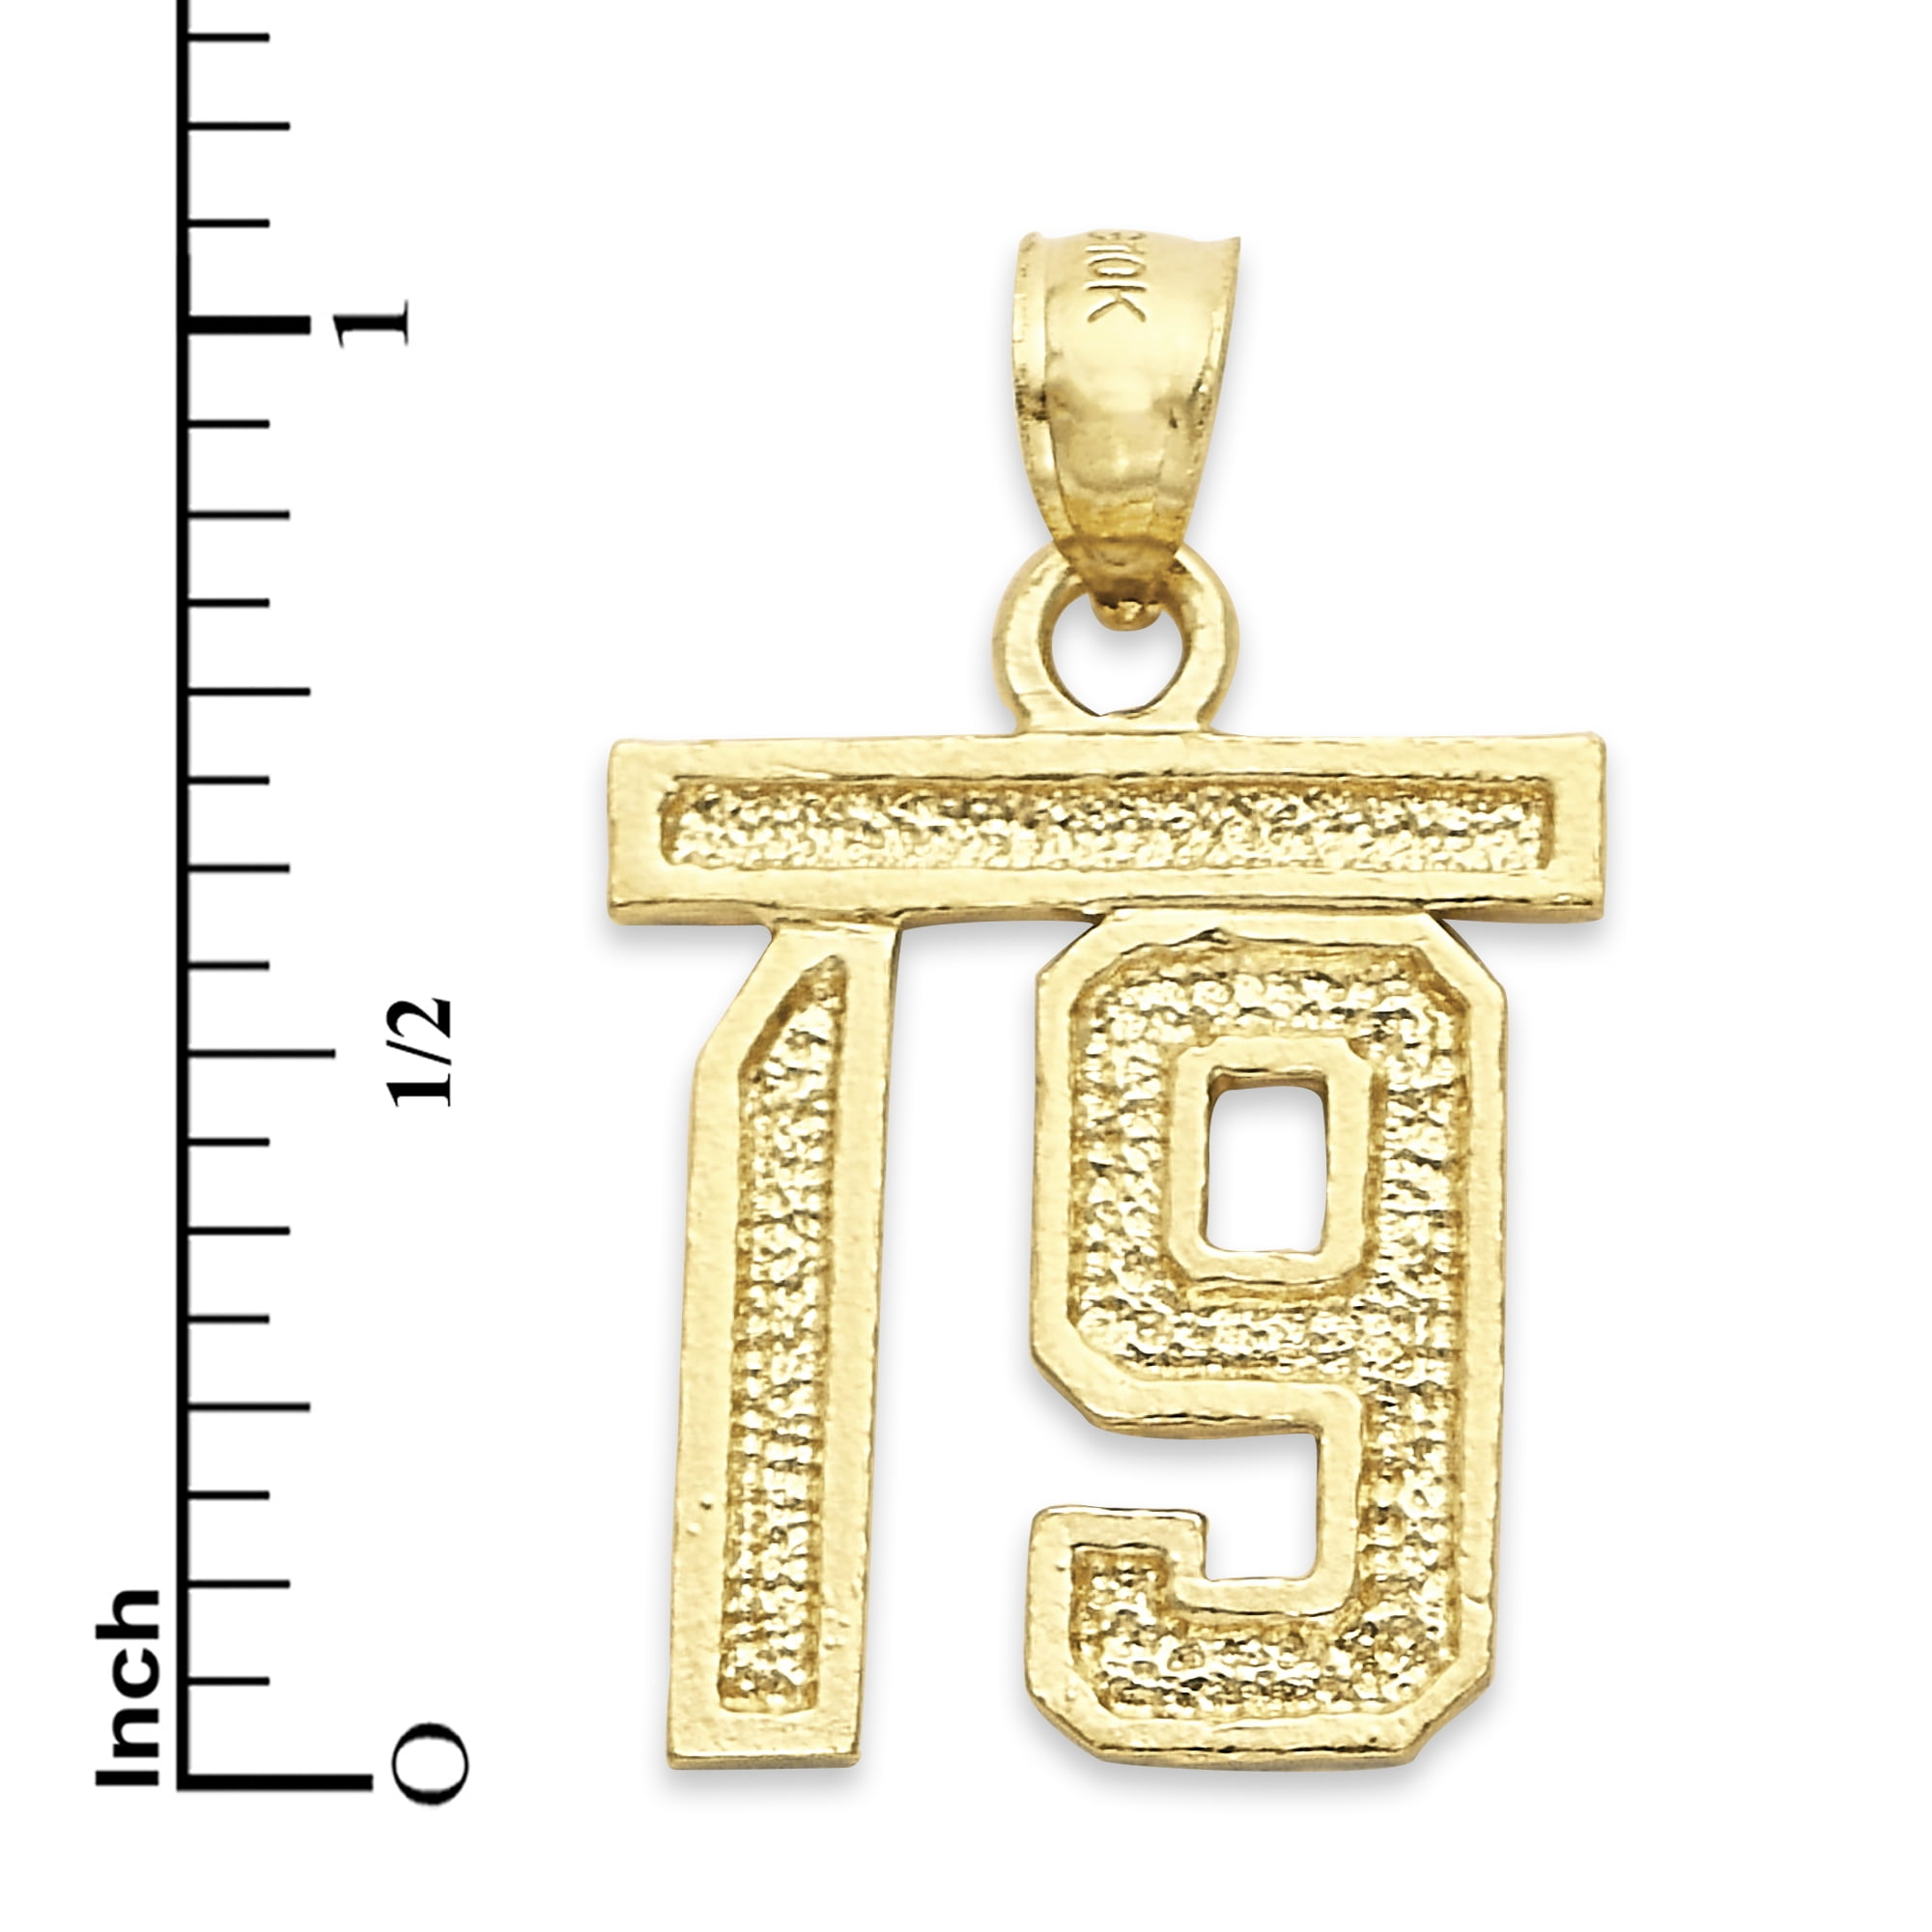 Kid's Varsity Number Necklace - 14K Solid Gold / 14 Chain (Ages 5-12)